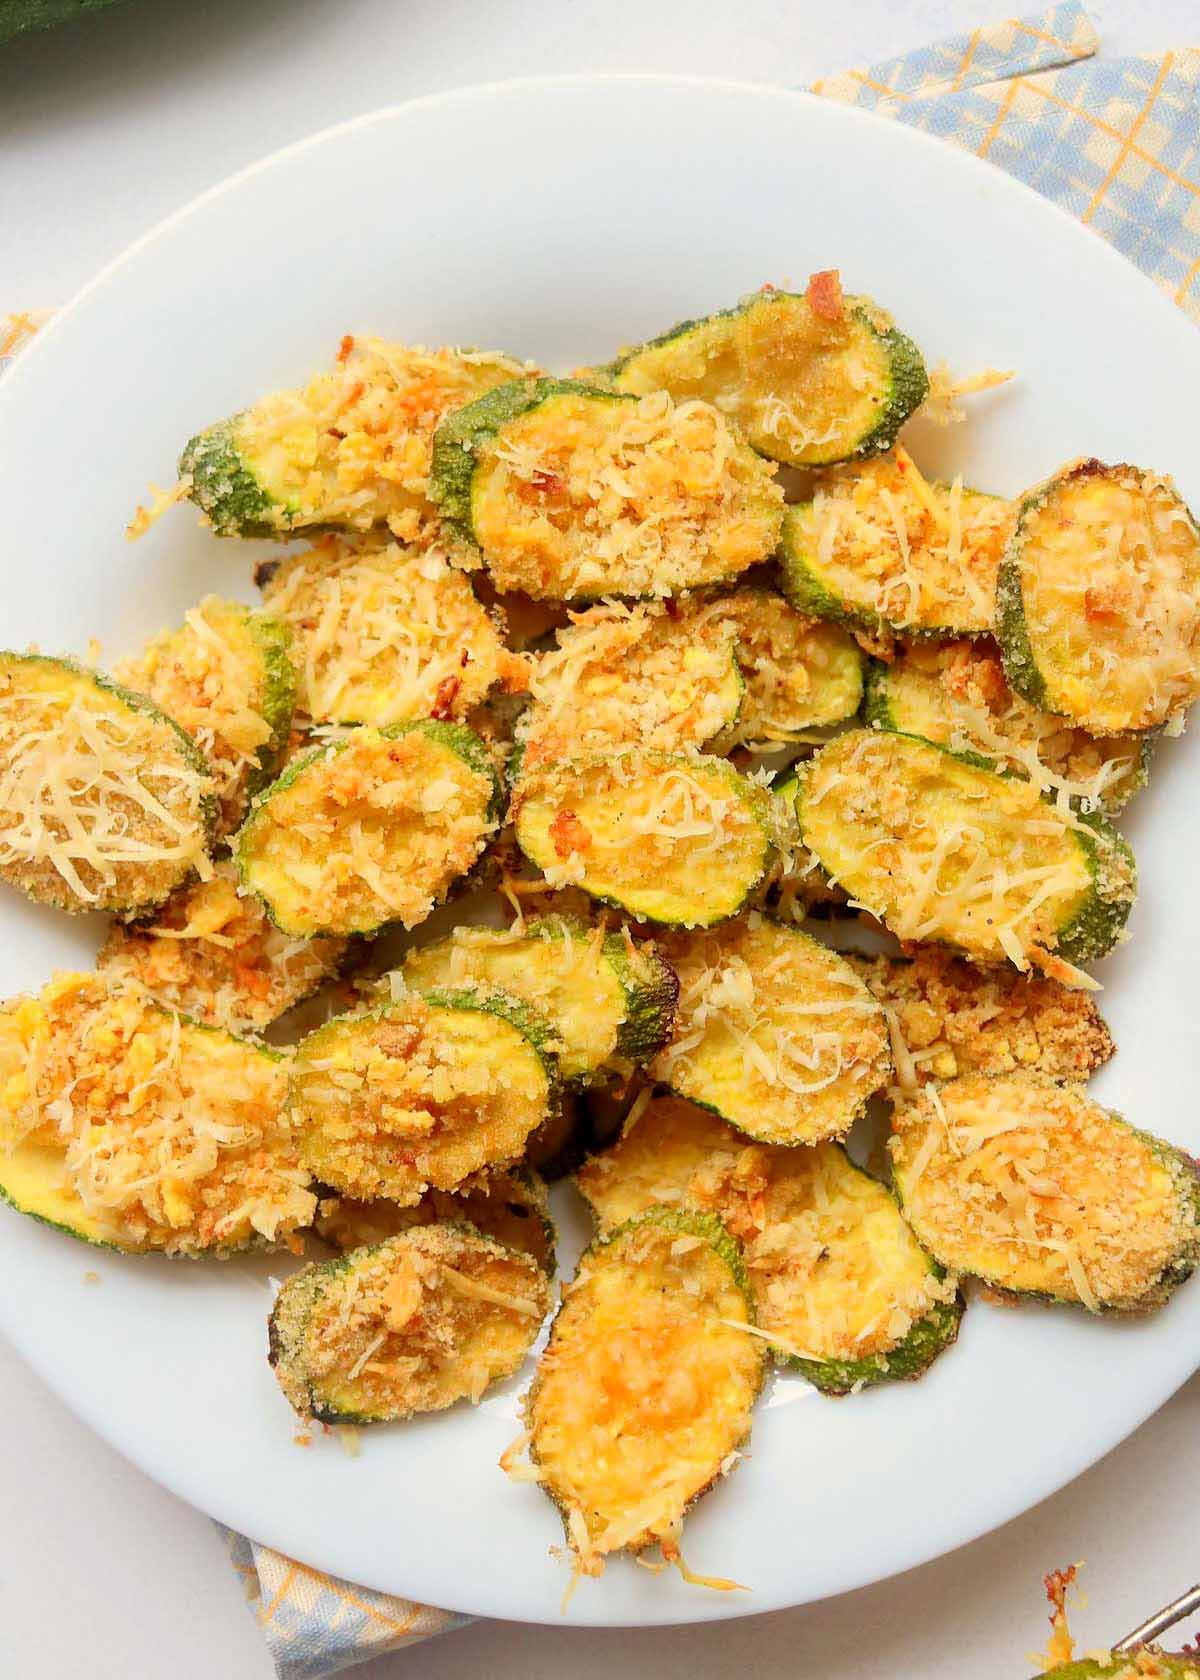 Zucchini chips on a white plate.